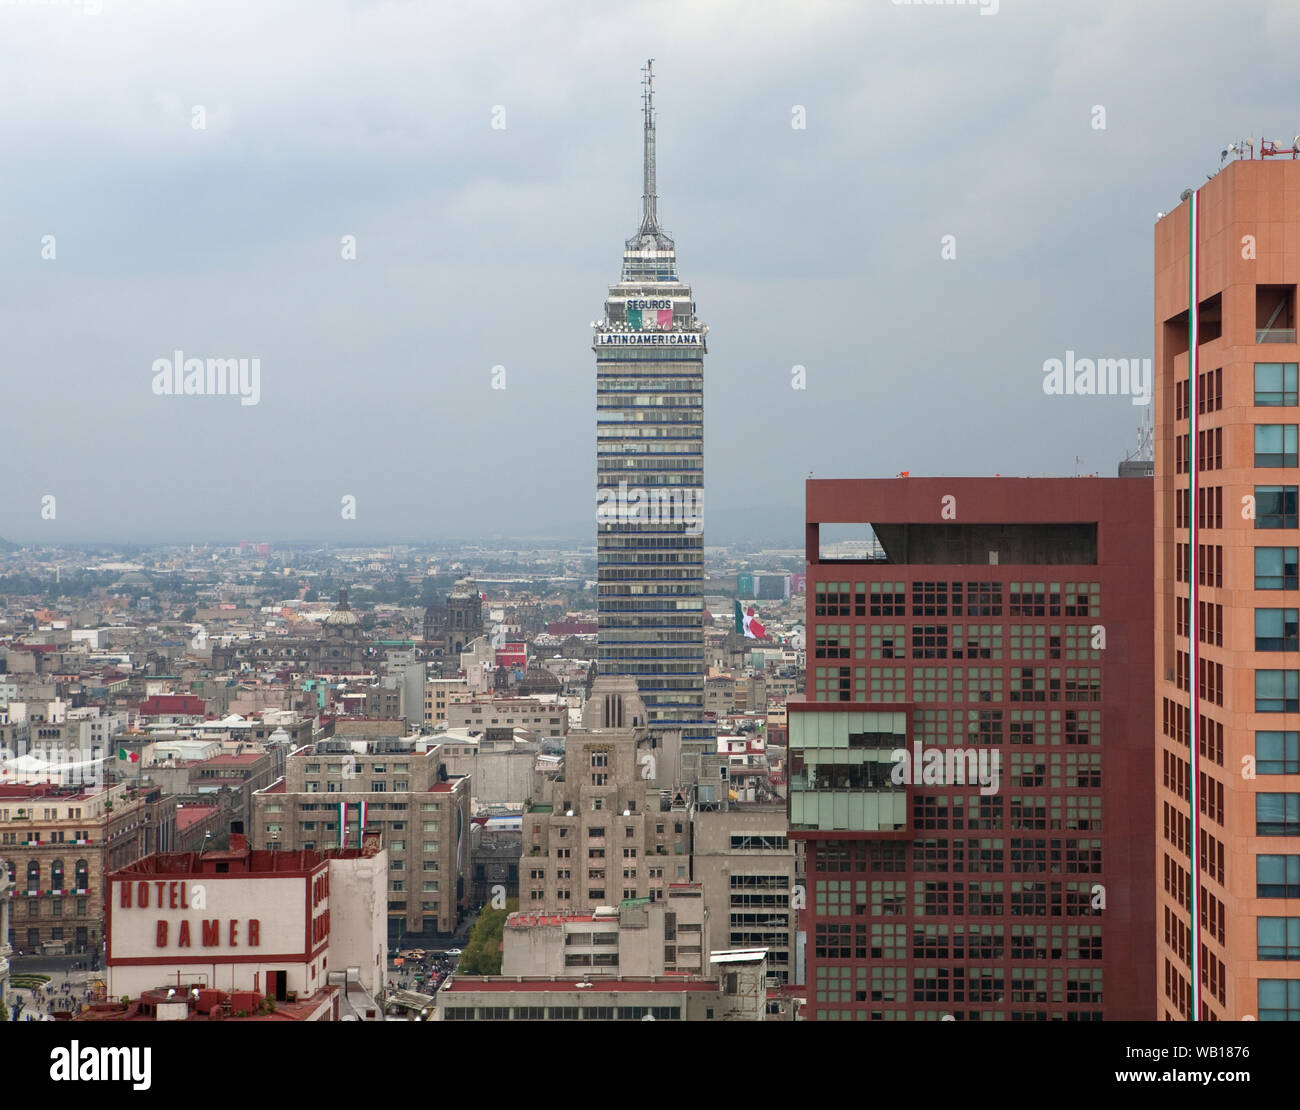 An aerial view of the Mexico City skyline with office blocks and the transmitter tower in the middle. Stock Photo